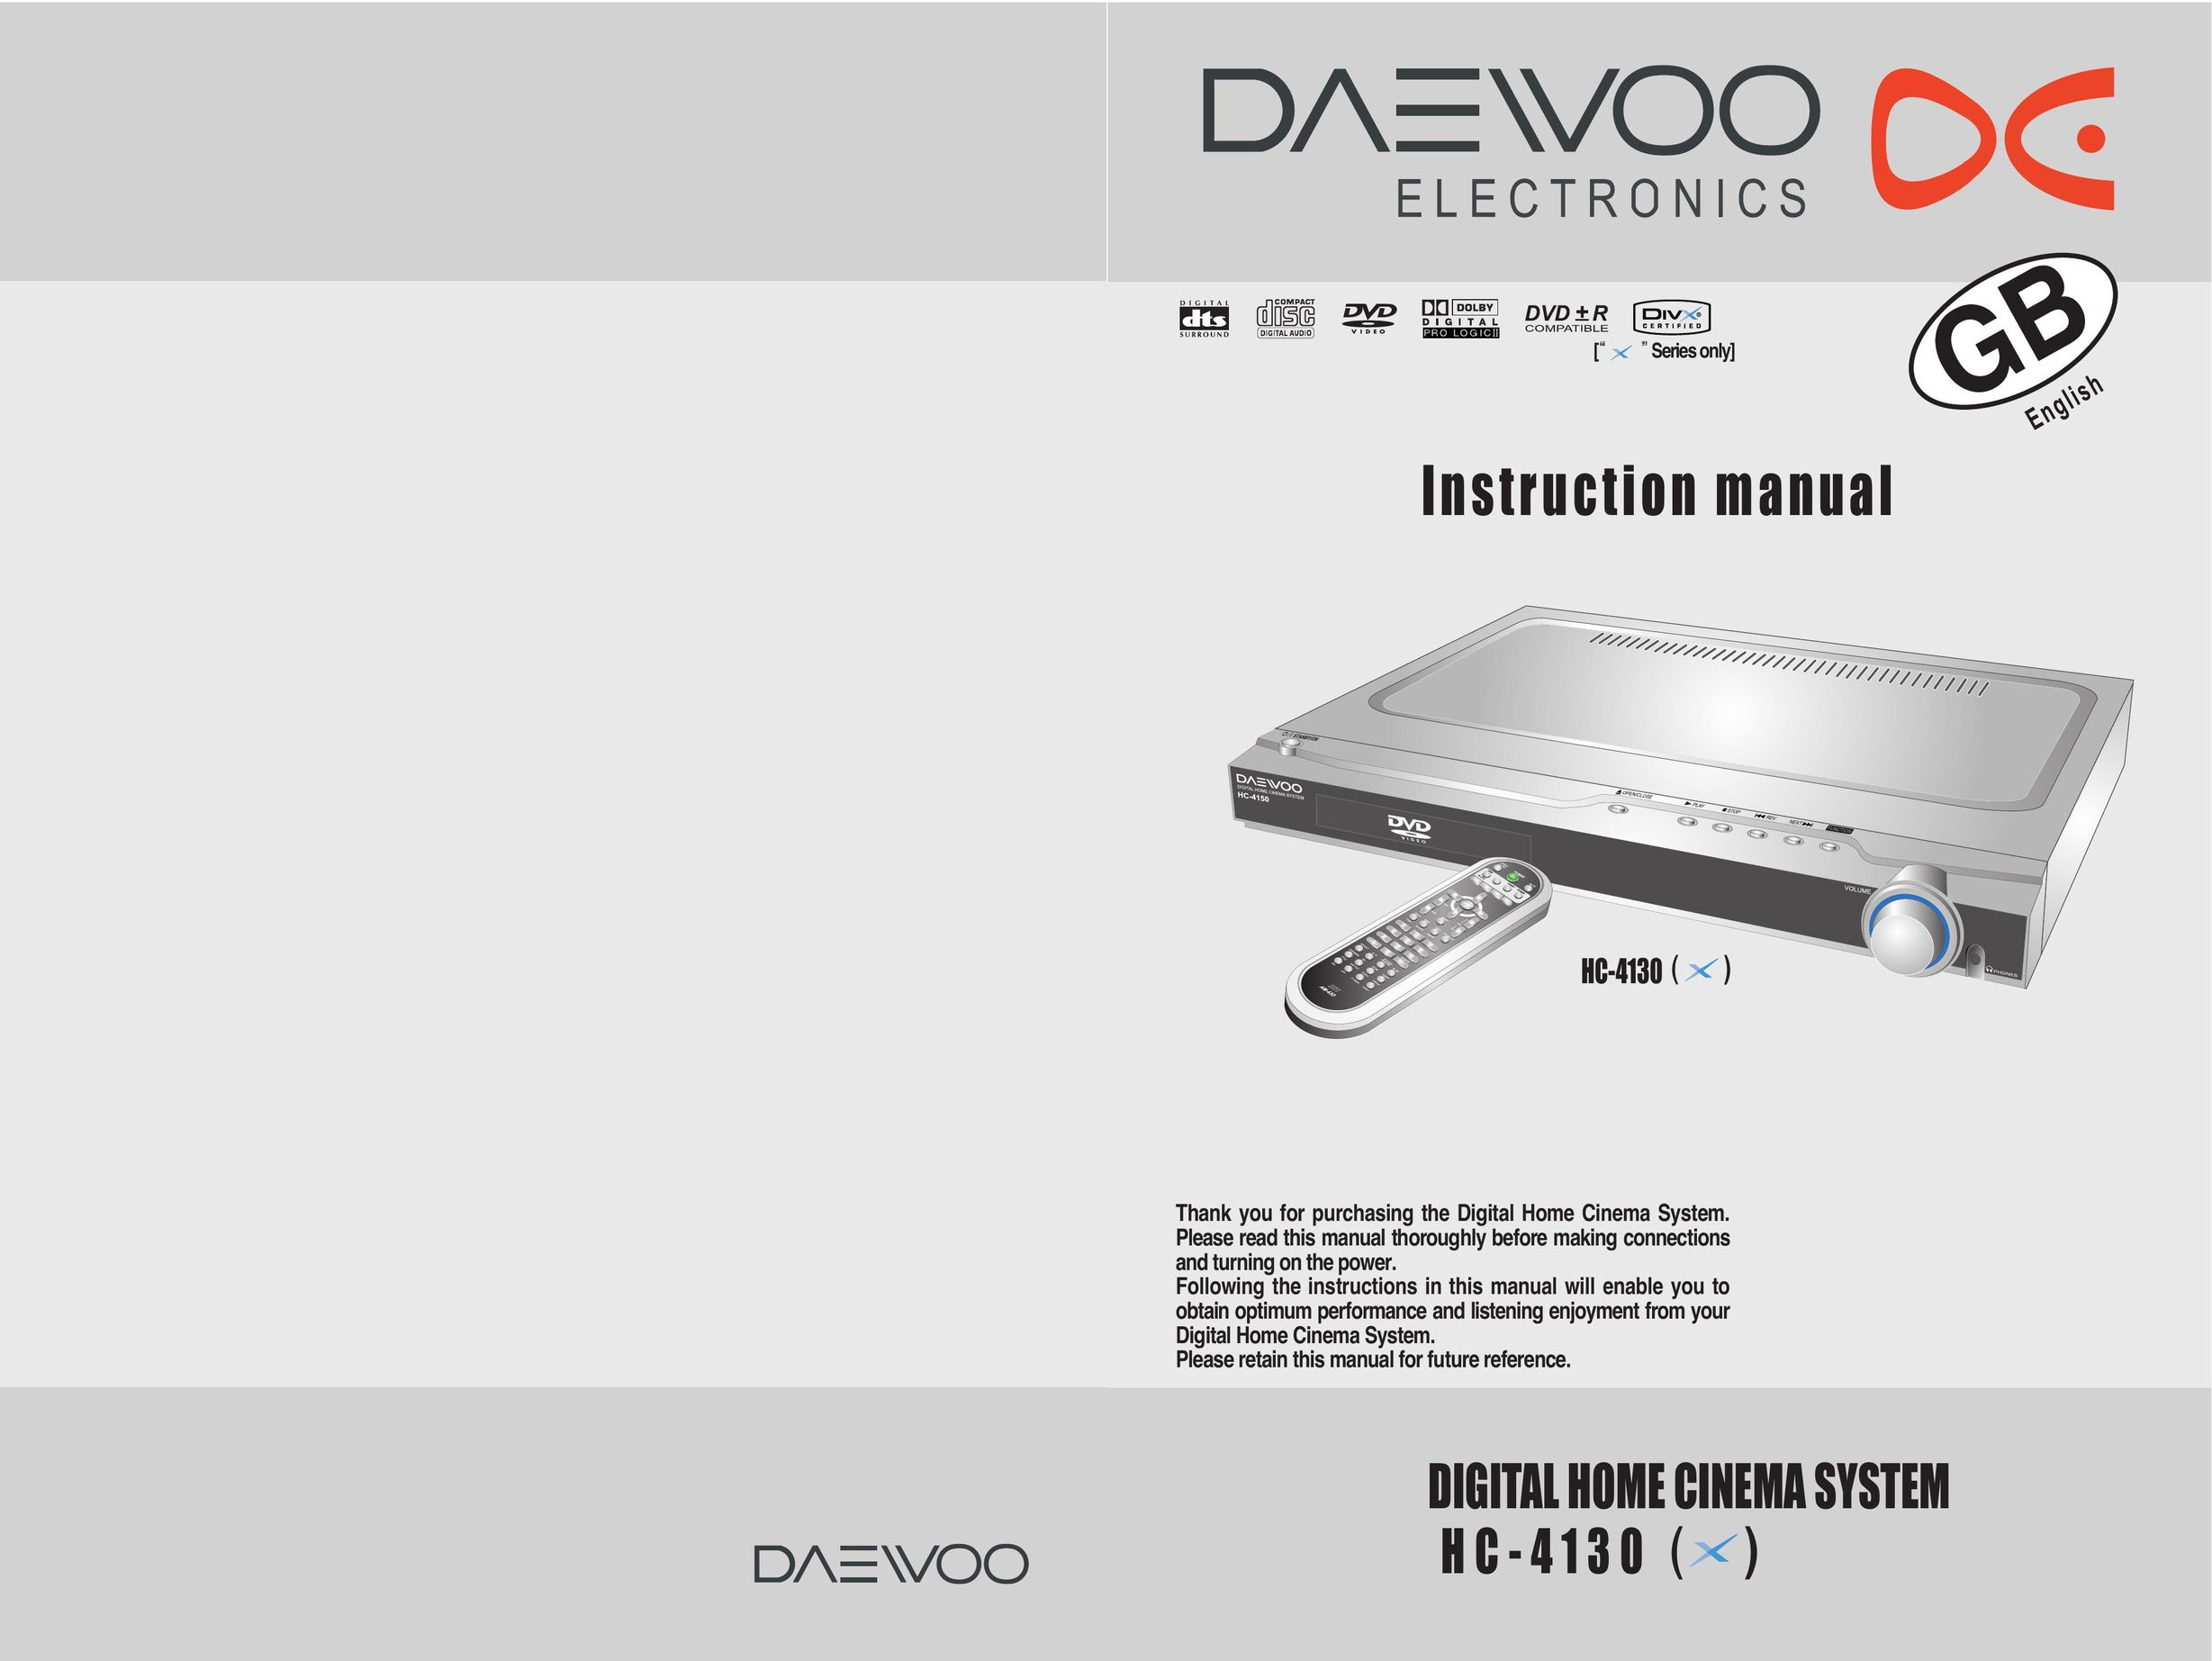 Daewoo Digital Home Cinema System Home Theater System User Manual